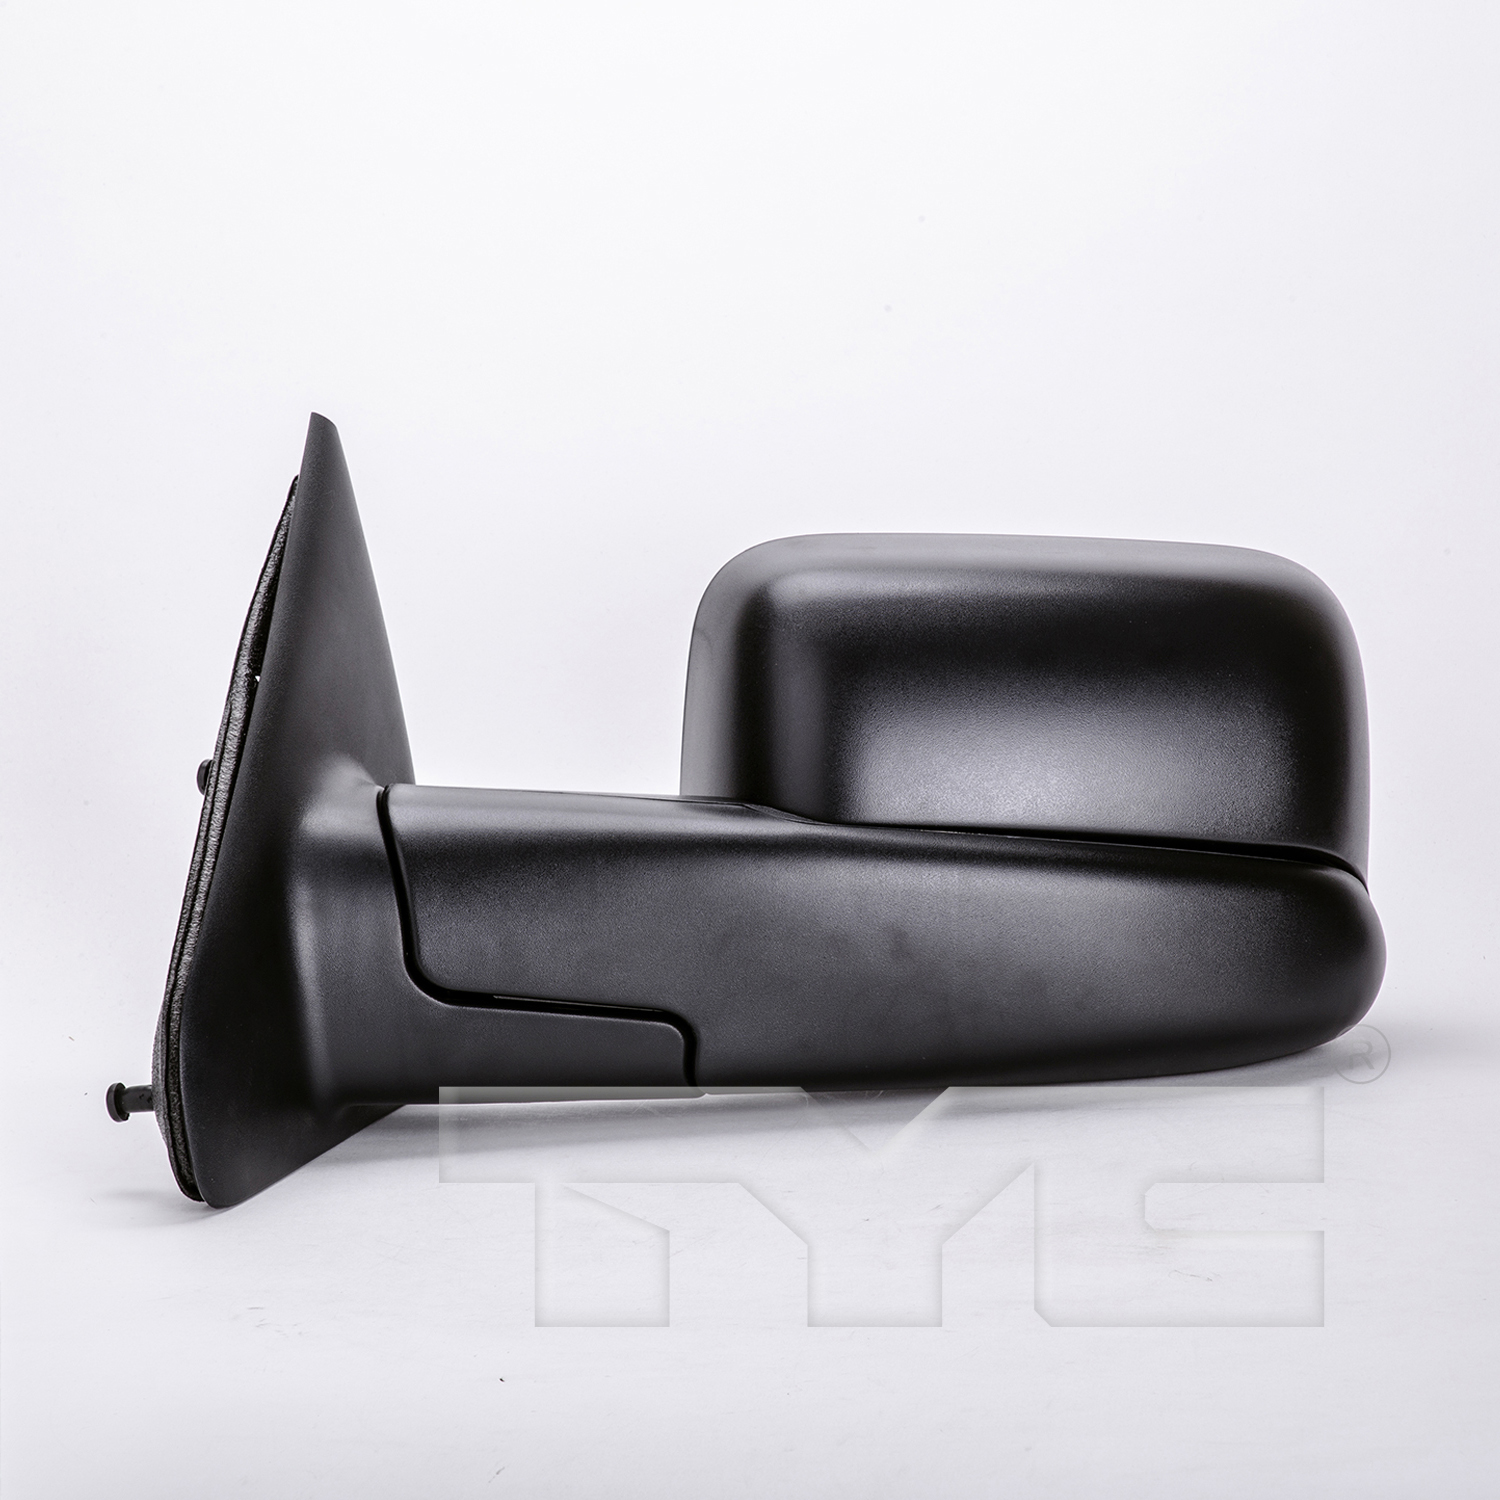 Aftermarket MIRRORS for DODGE - RAM 1500, RAM 1500,05-09,LT Mirror outside rear view